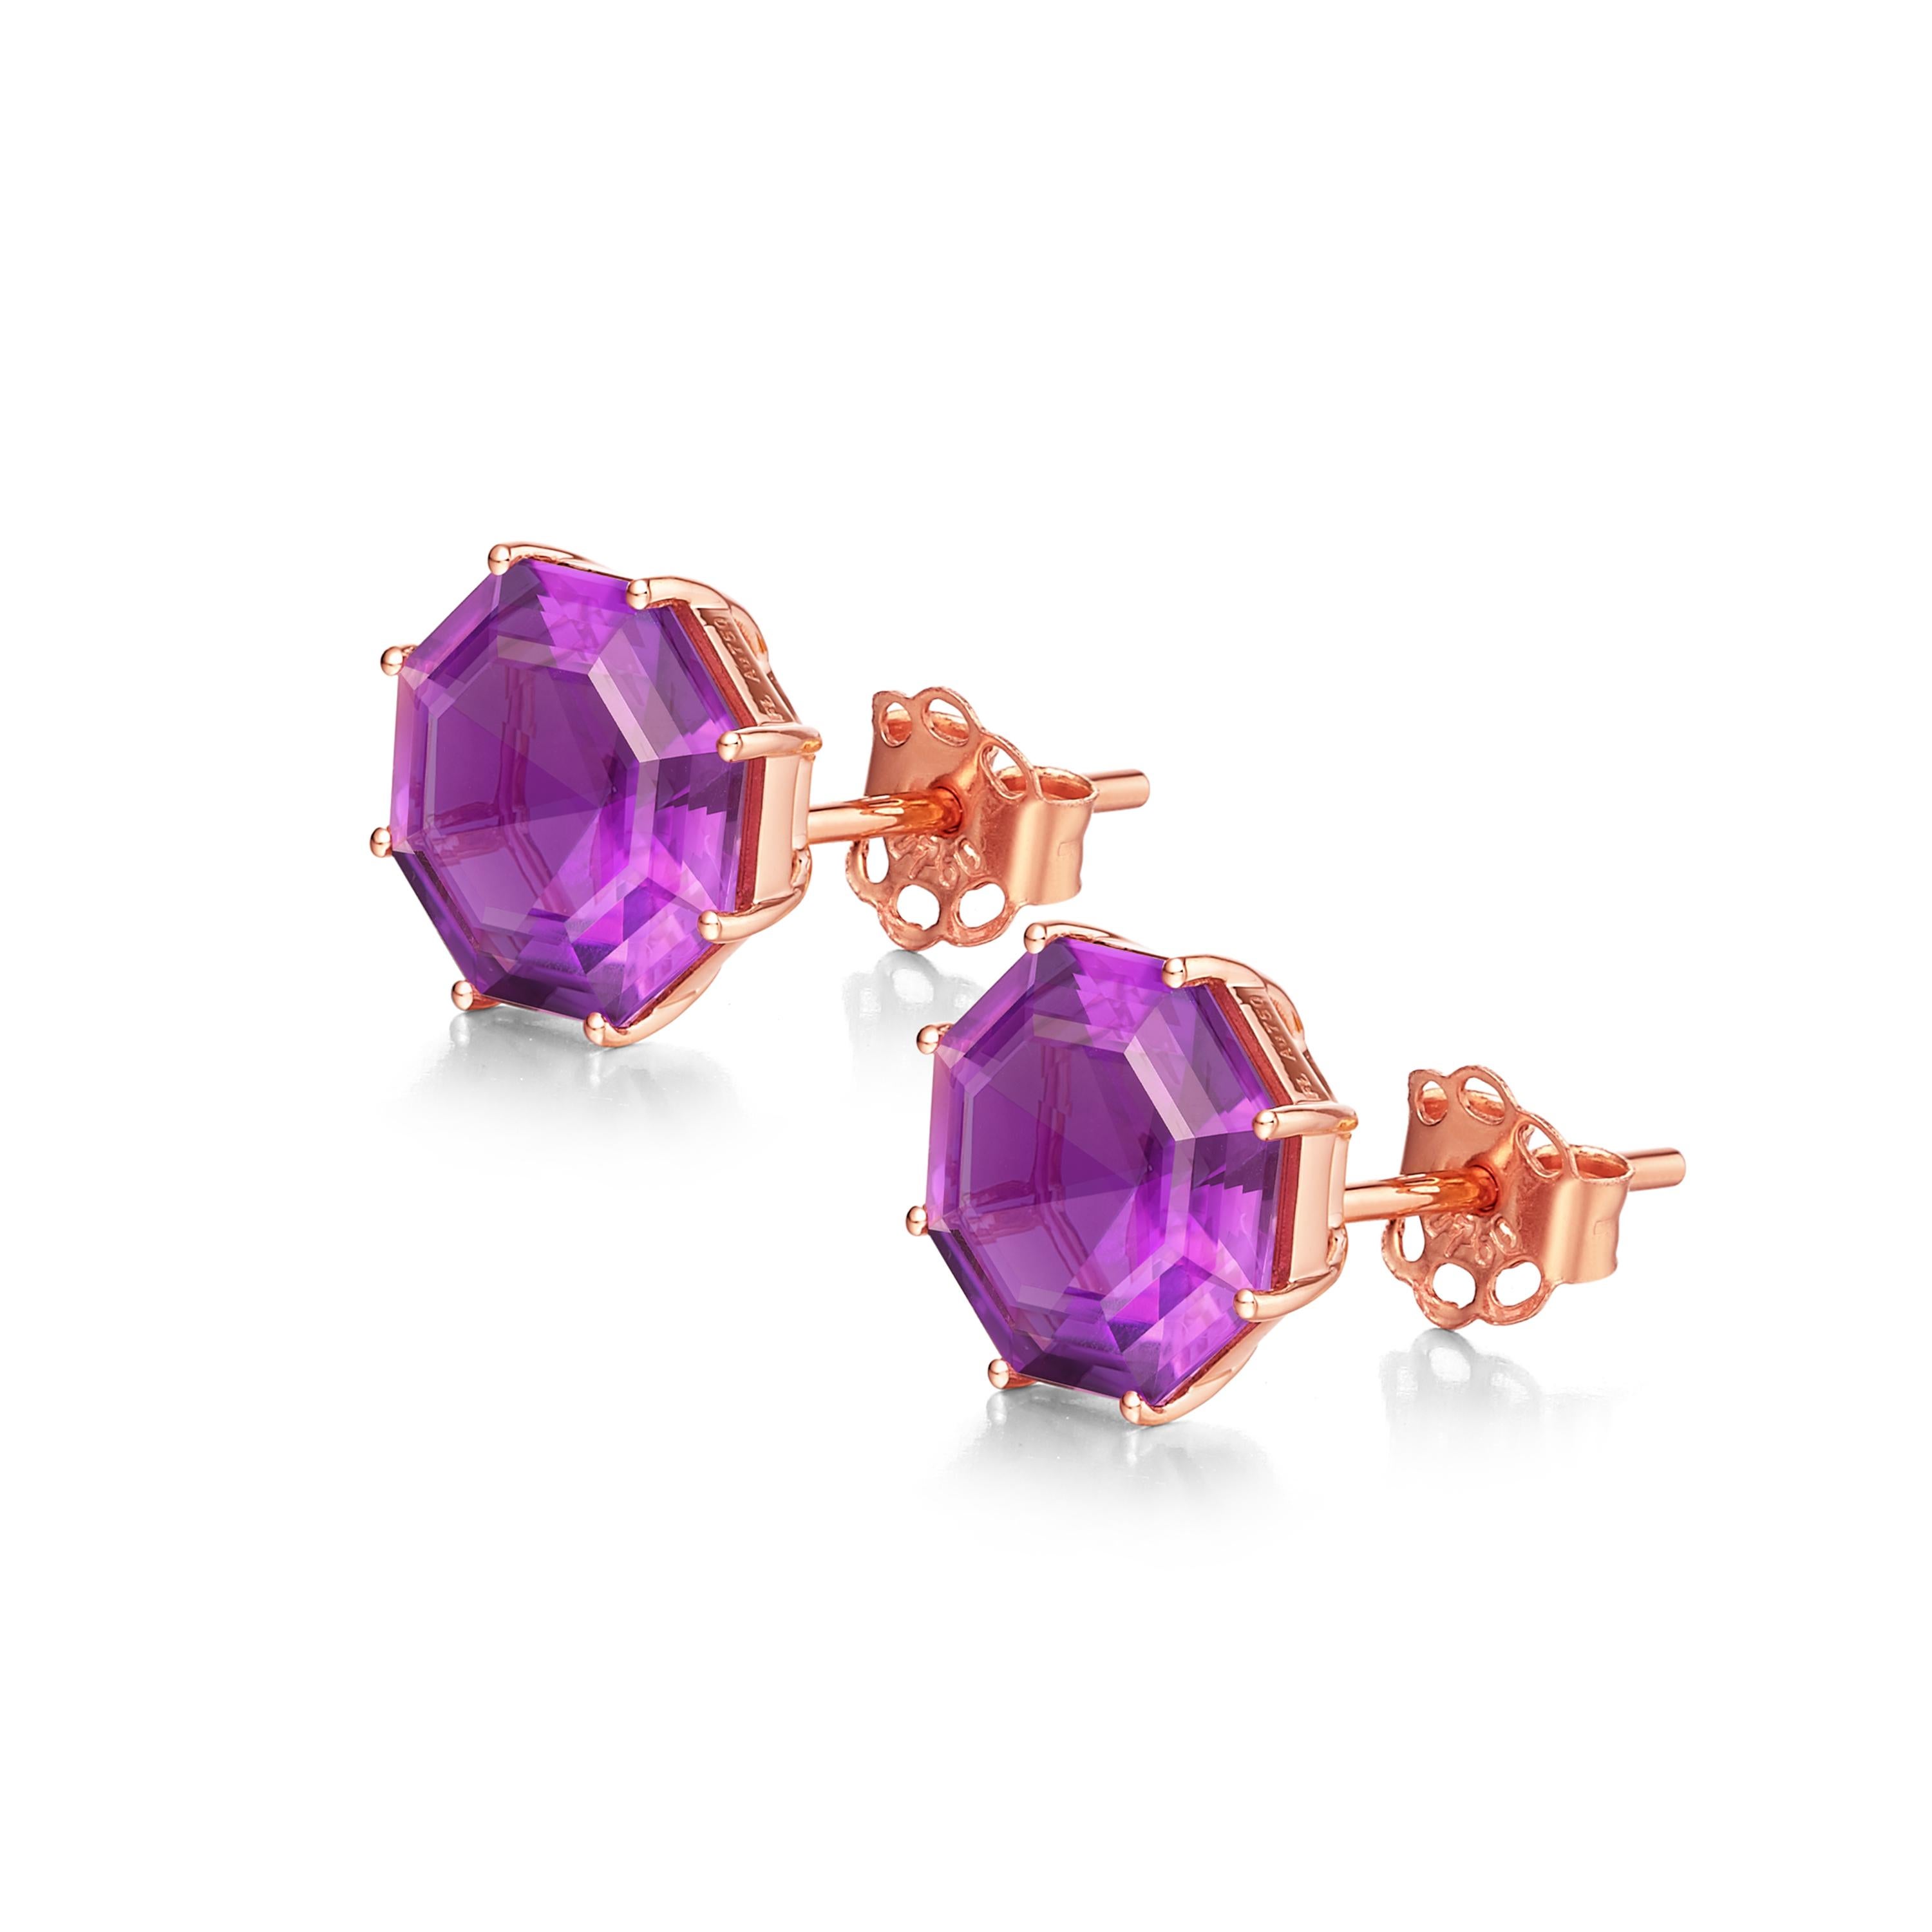 Octagon cuts were widely popular in the Victorian era. Award-winning designer Fei Liu adds a modern minimalist touch so the gemstone's kaleidoscopic facets becomes the star of the jewellery. The 'Victoriana' octagon cut stud earrings feature 3.20ct